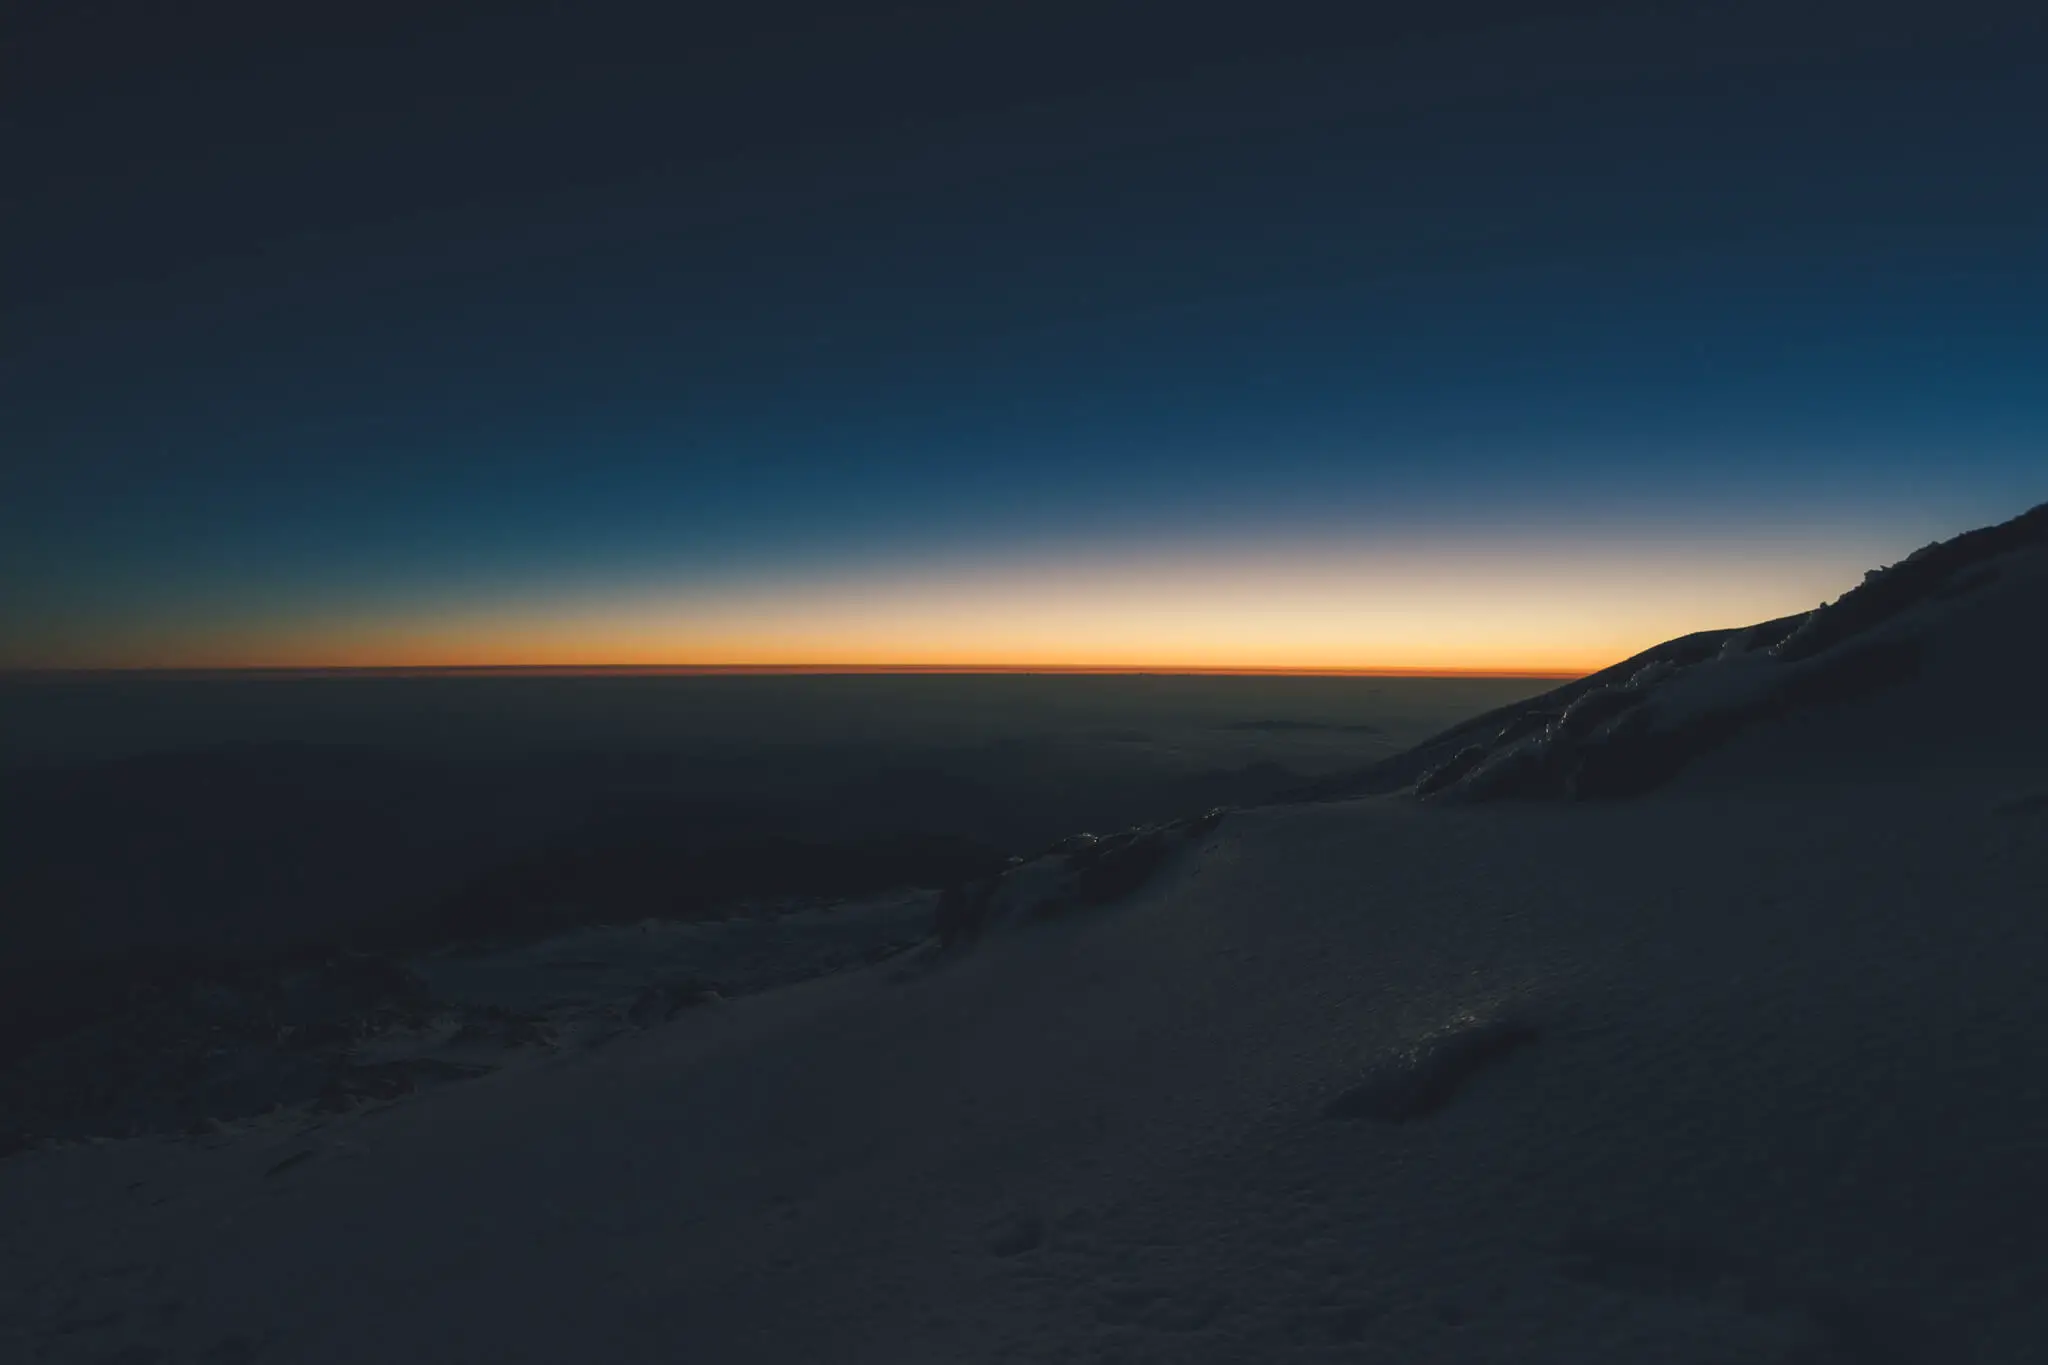 Sunrise over the Gulf of Mexico from high on Pico de Orizaba